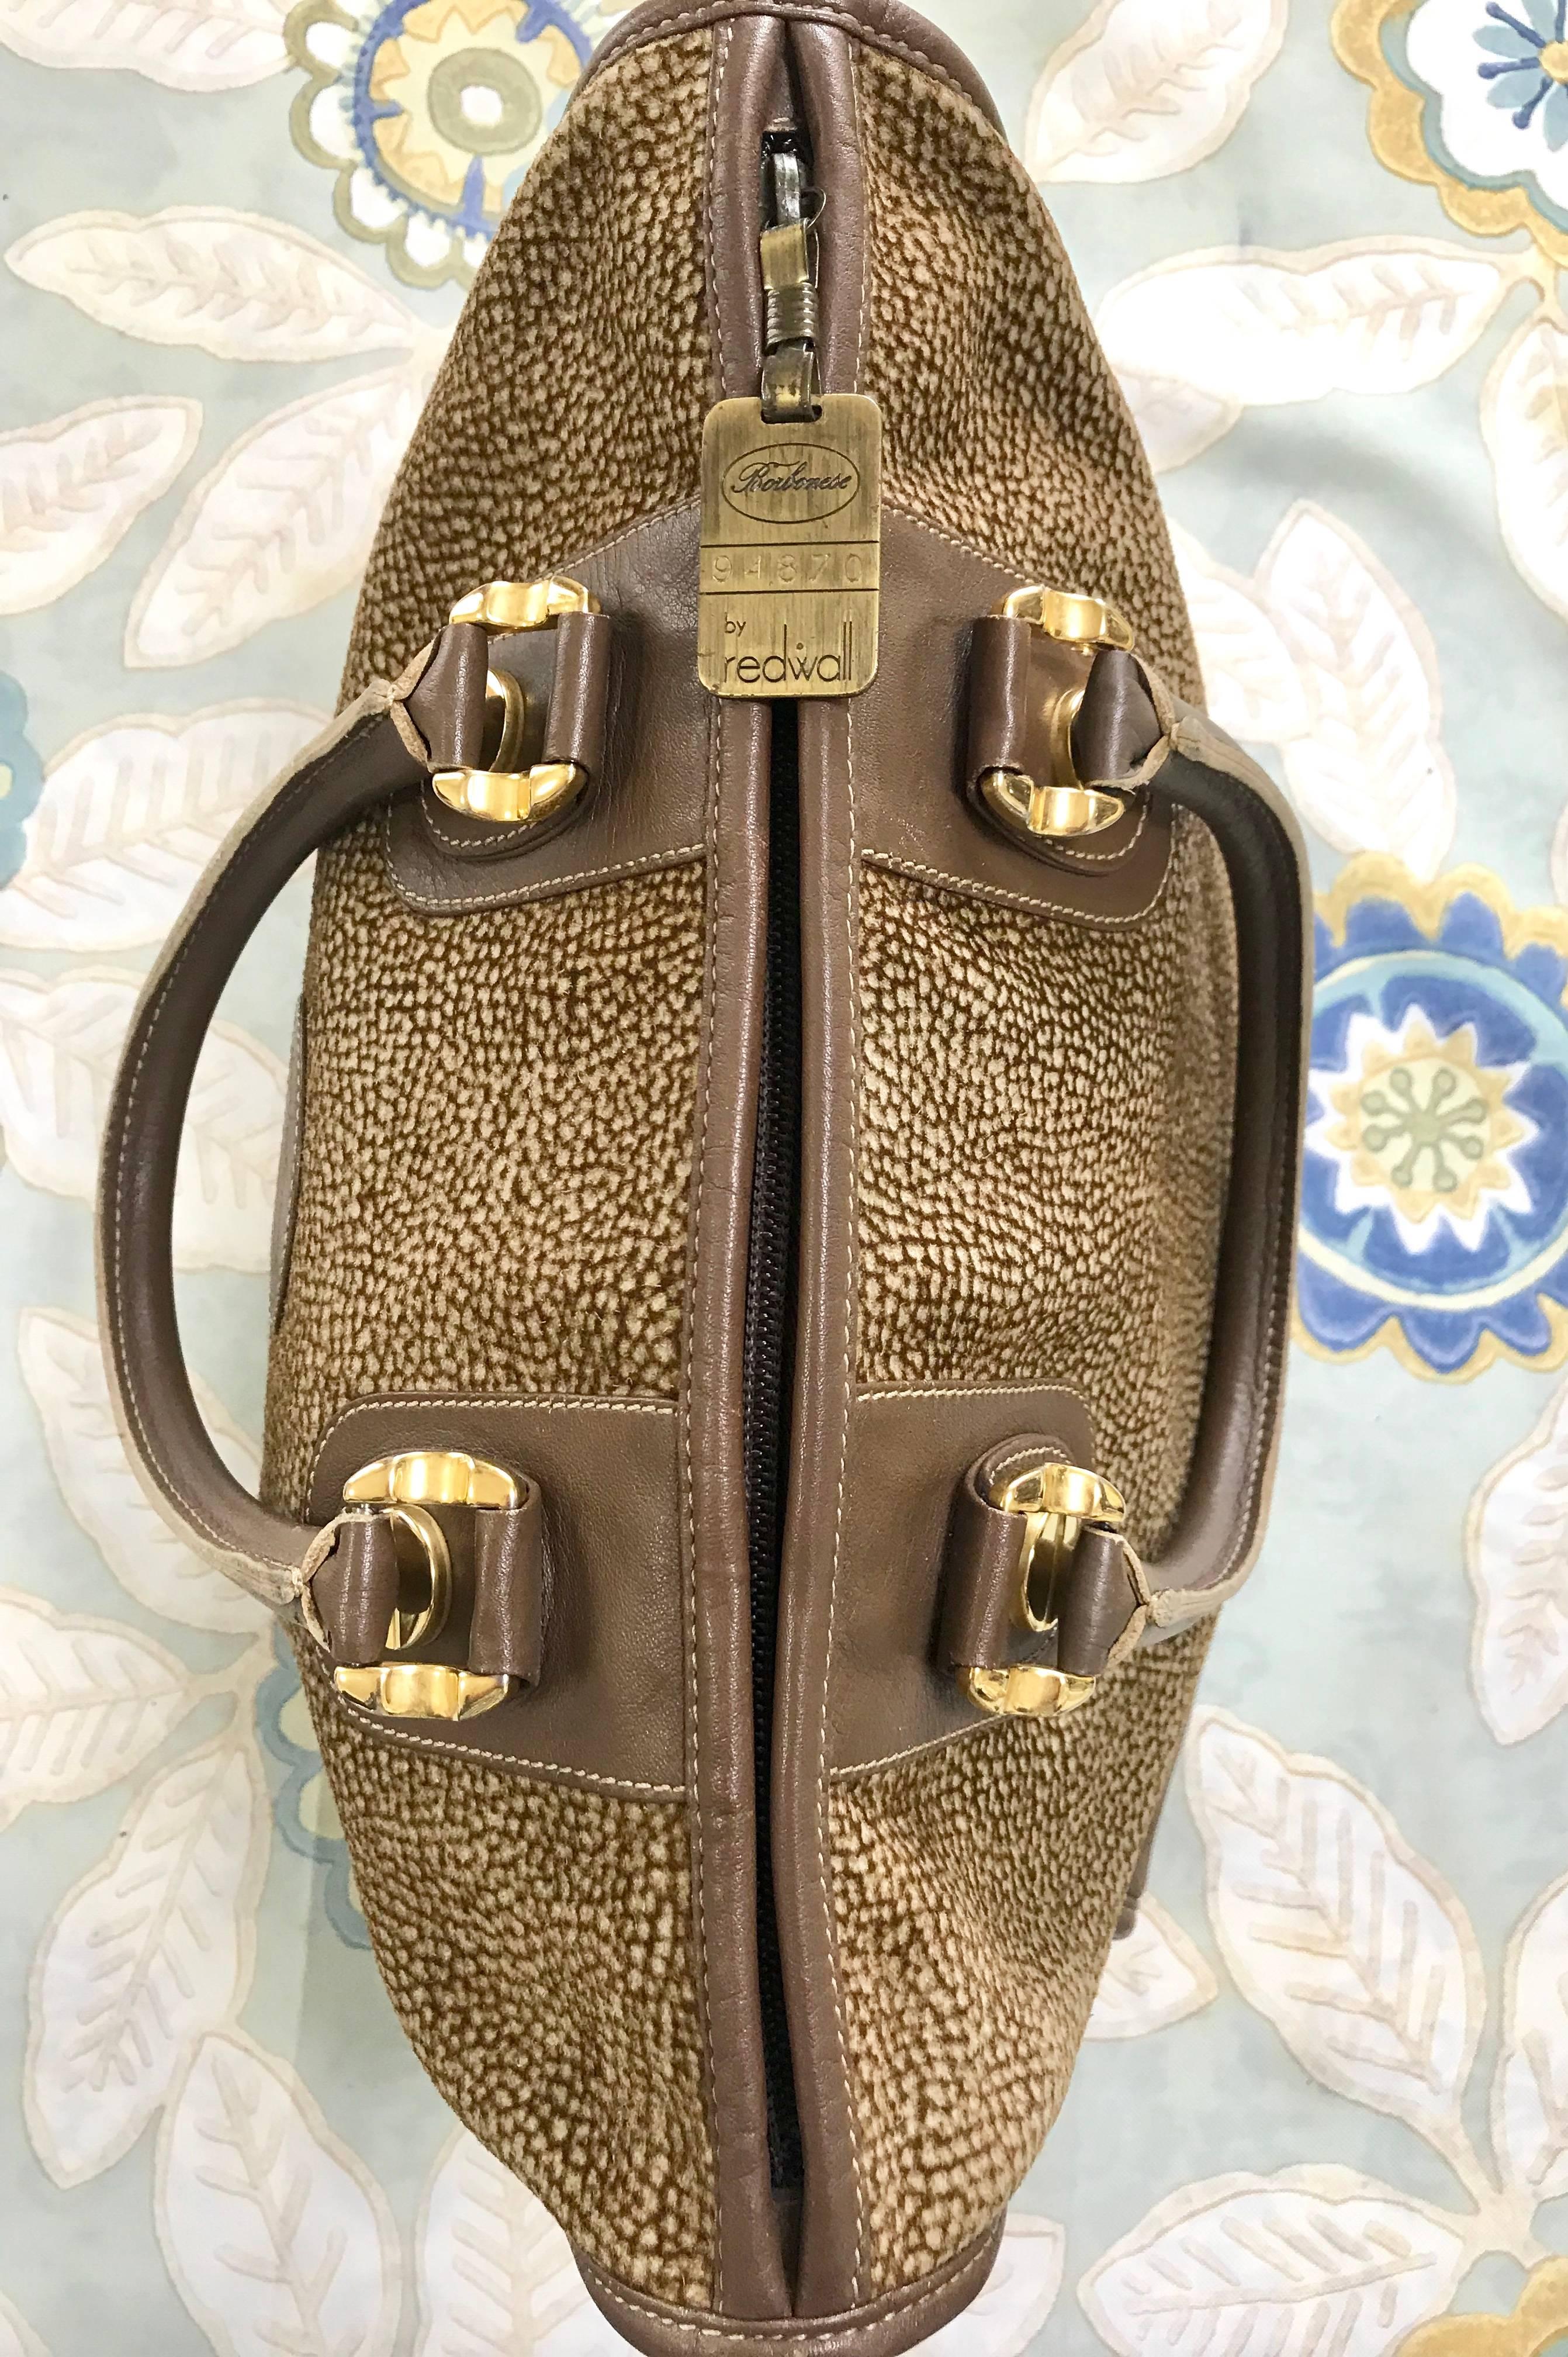 Redwall Vintage Borbonese brown and beige leather bag  For Sale 2